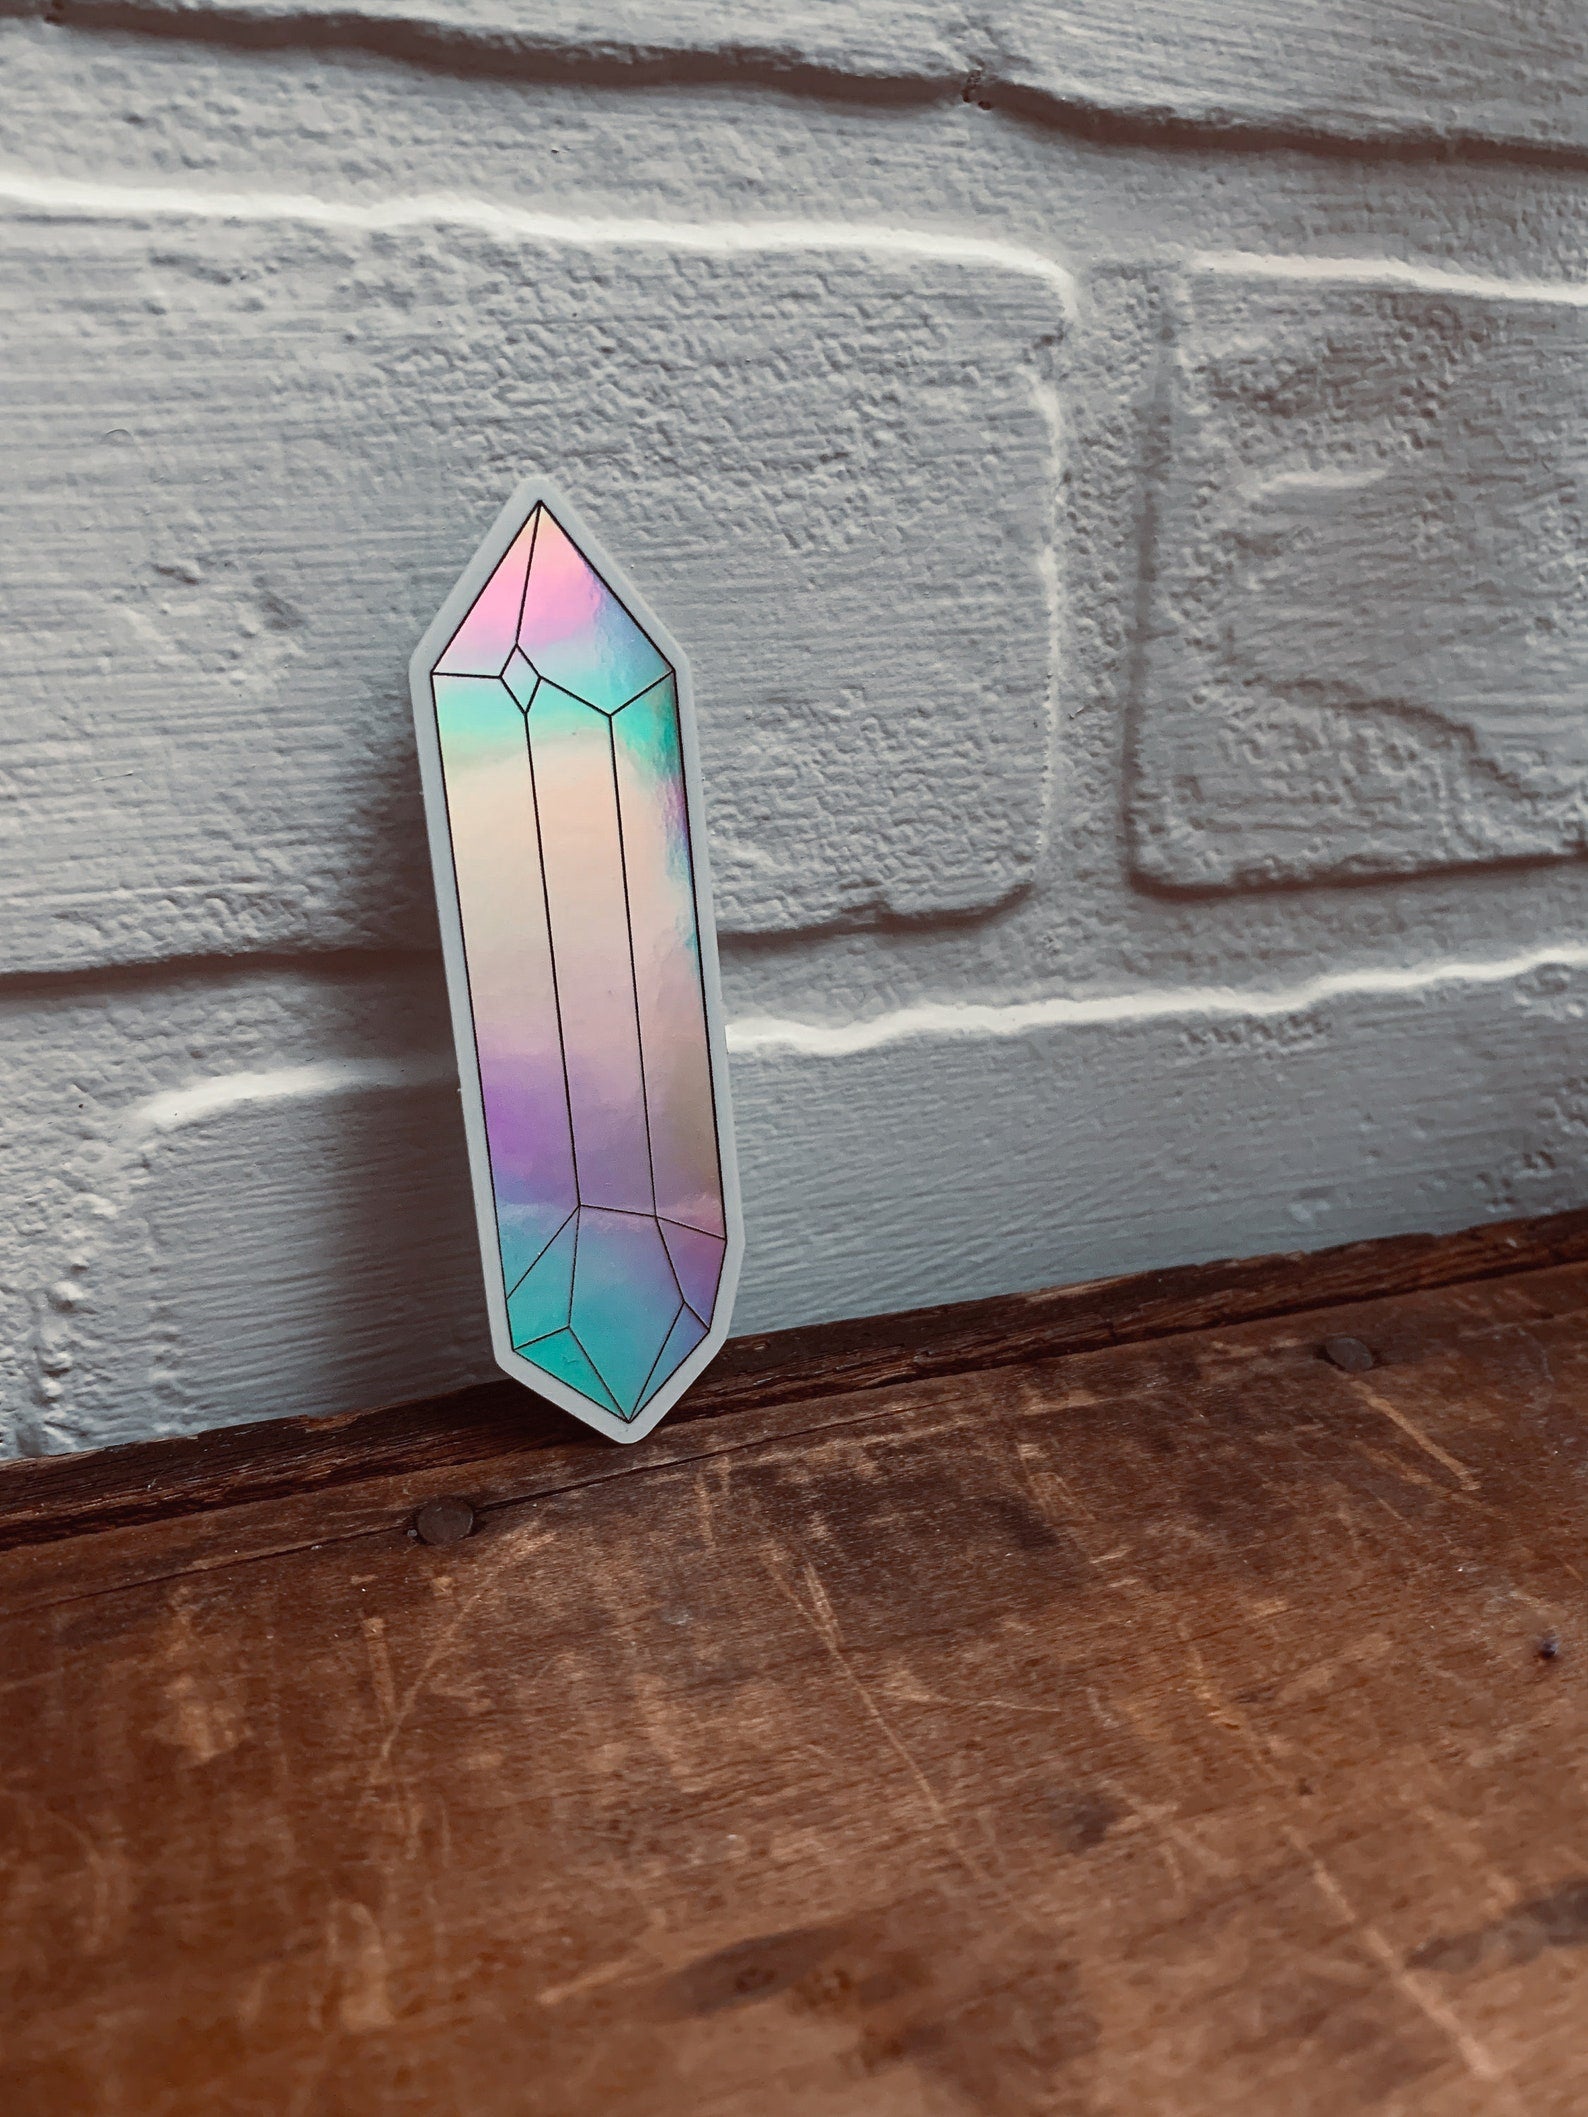 holographic crystal sticker made by The Stone Maidens.